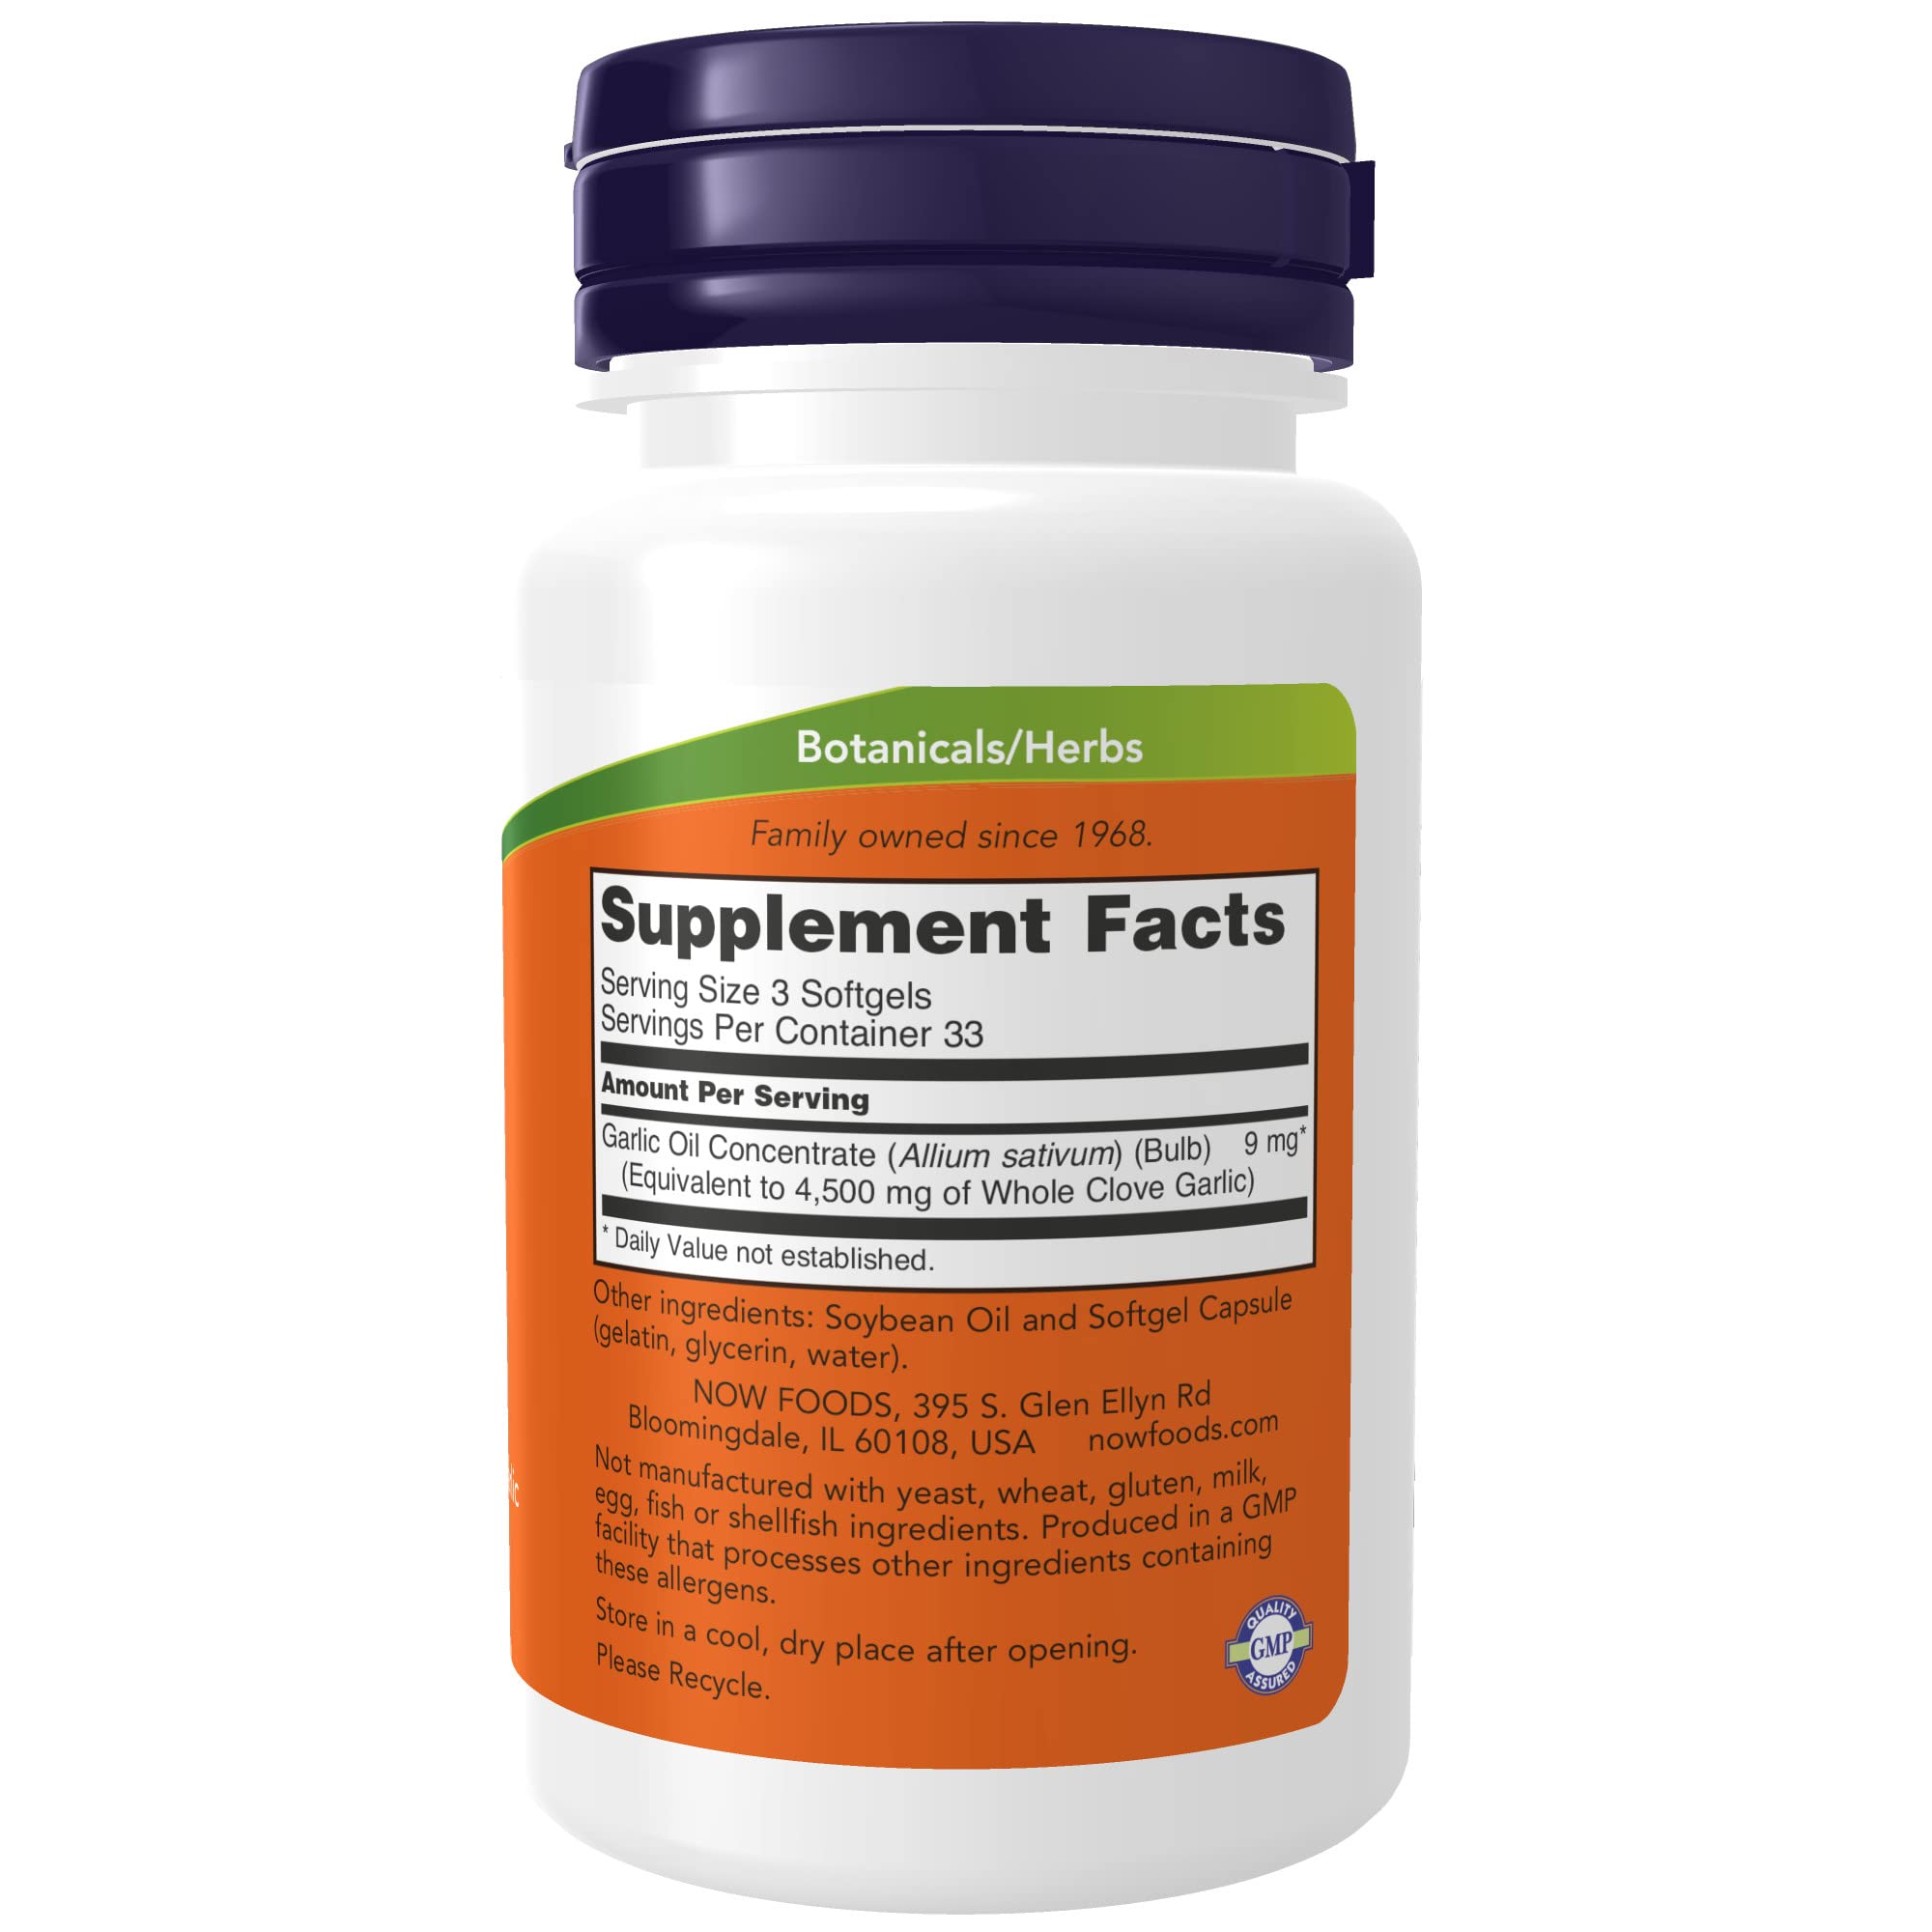 NOW Supplements, Garlic Oil 1500 mg, Serving Size Equivalent to Whole Clove Garlic, 100 Softgels